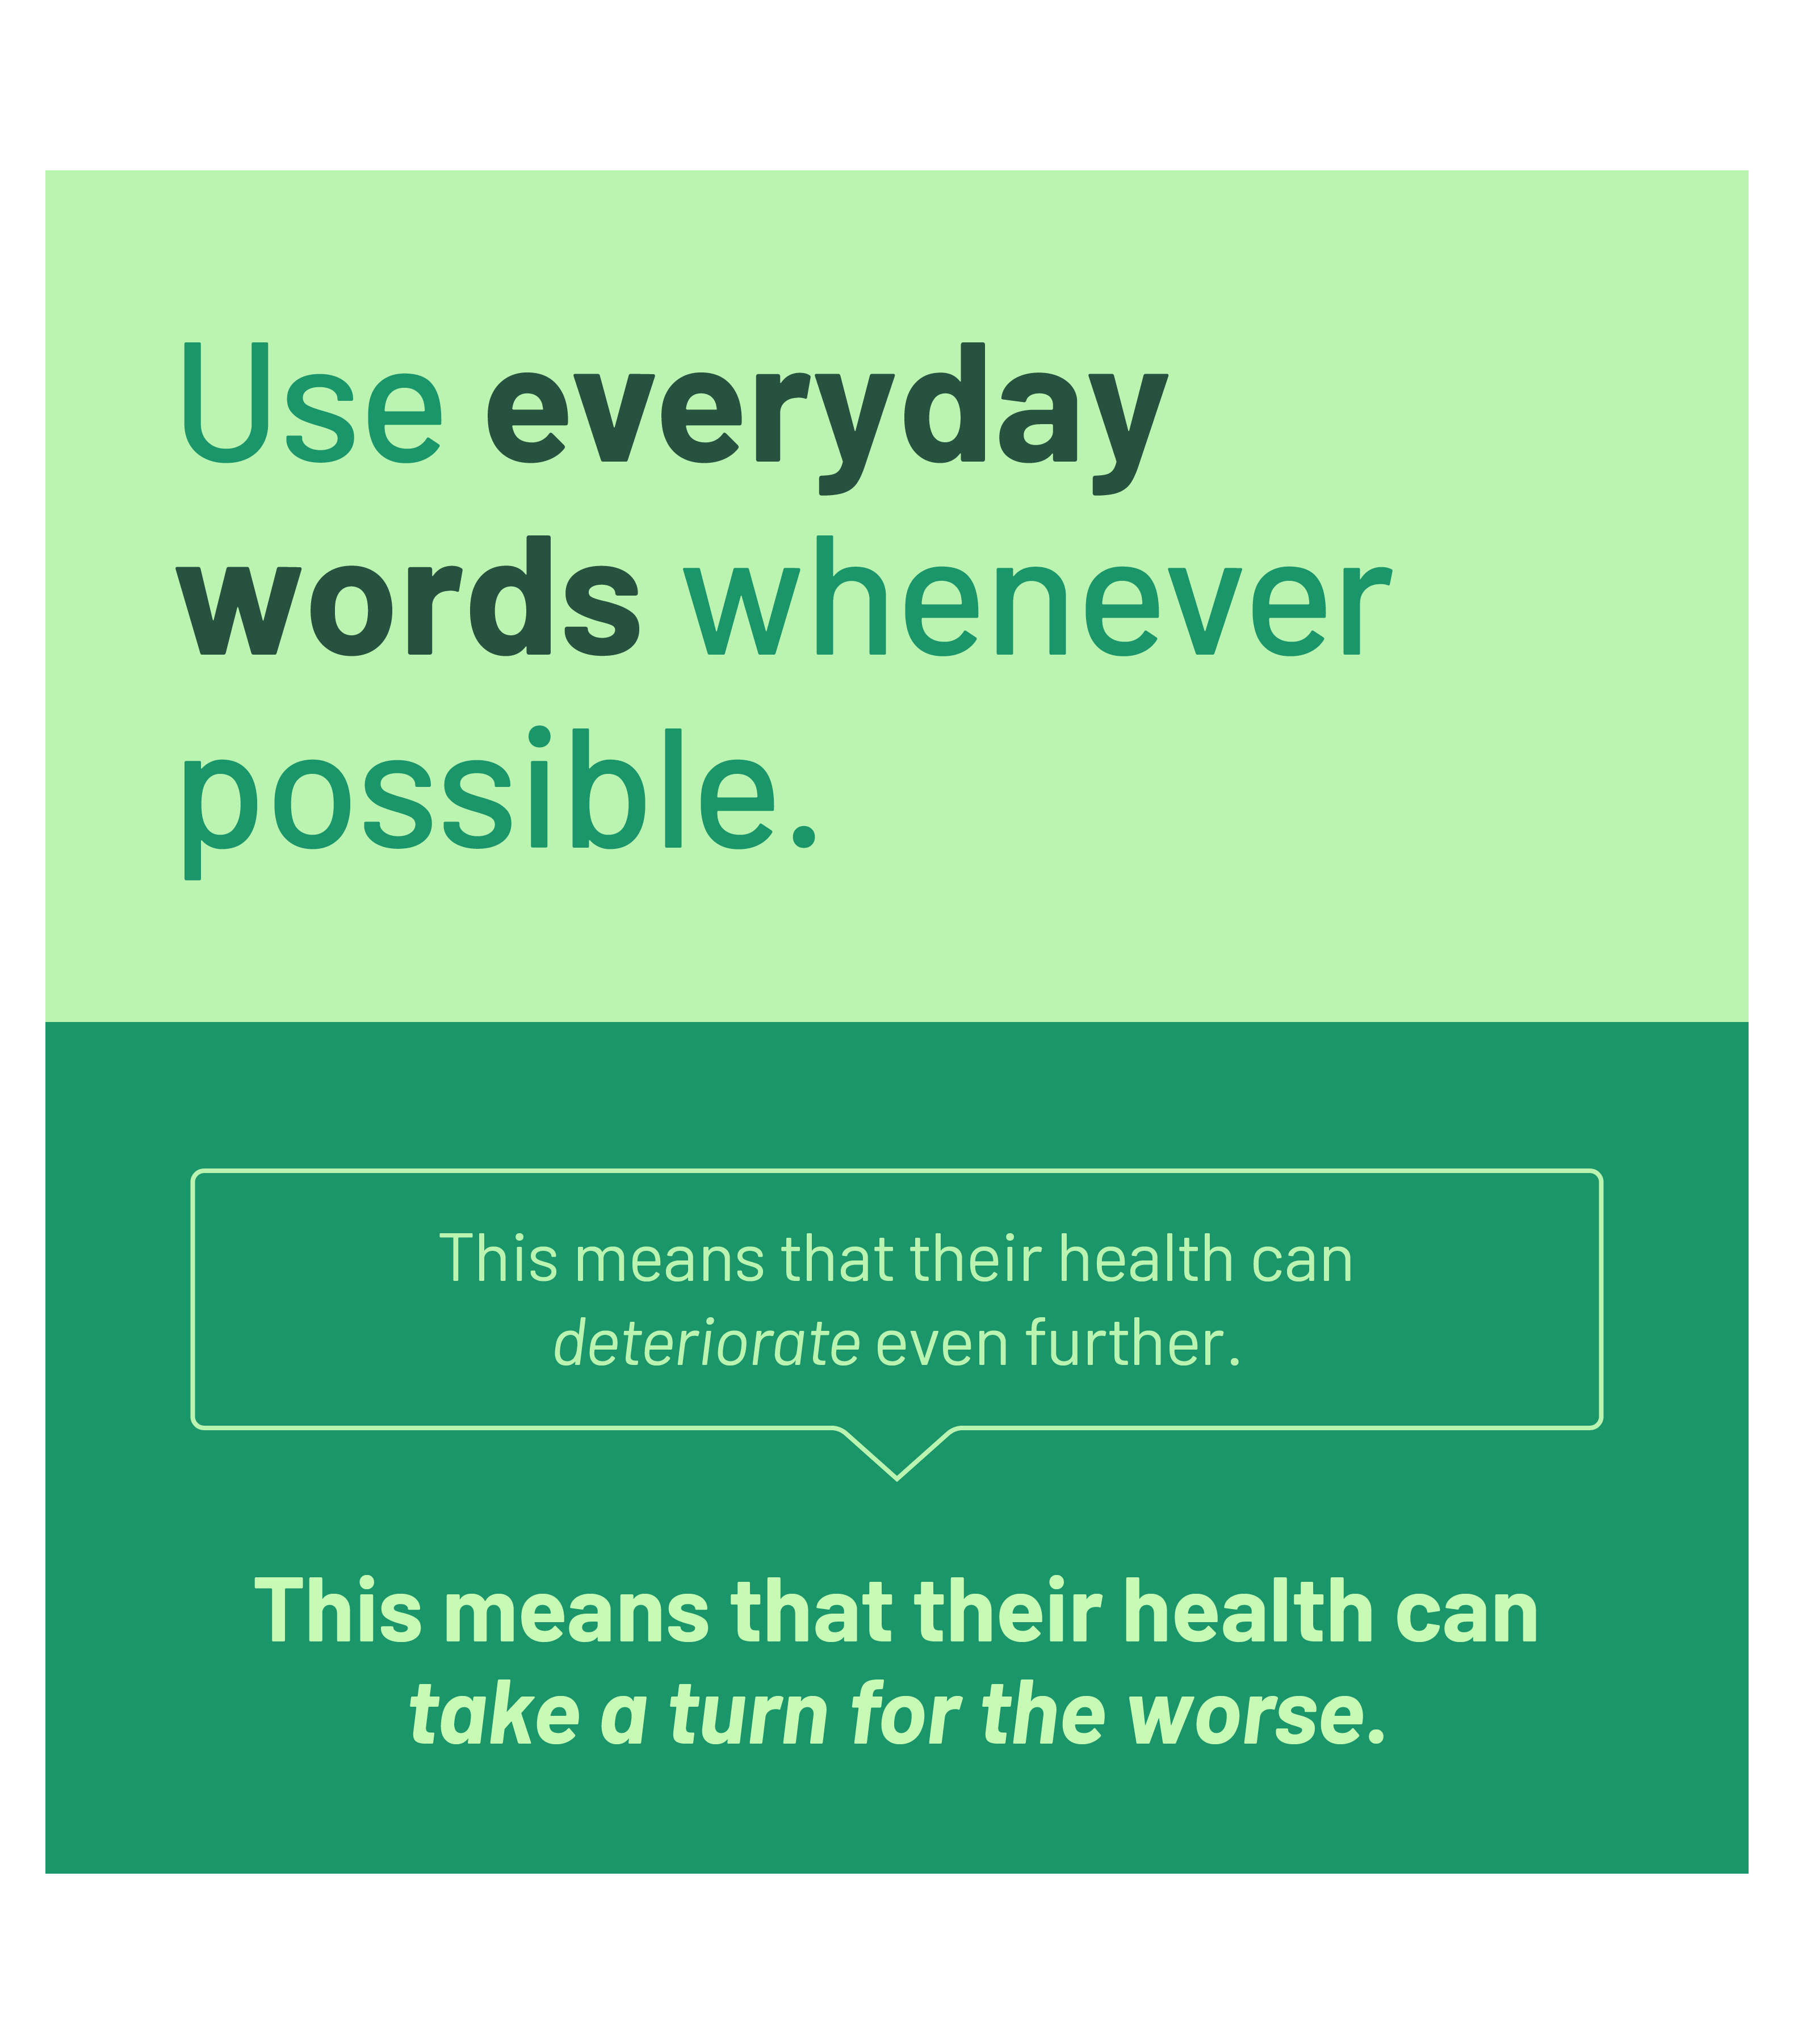 Use everyday words whenever possible, with example